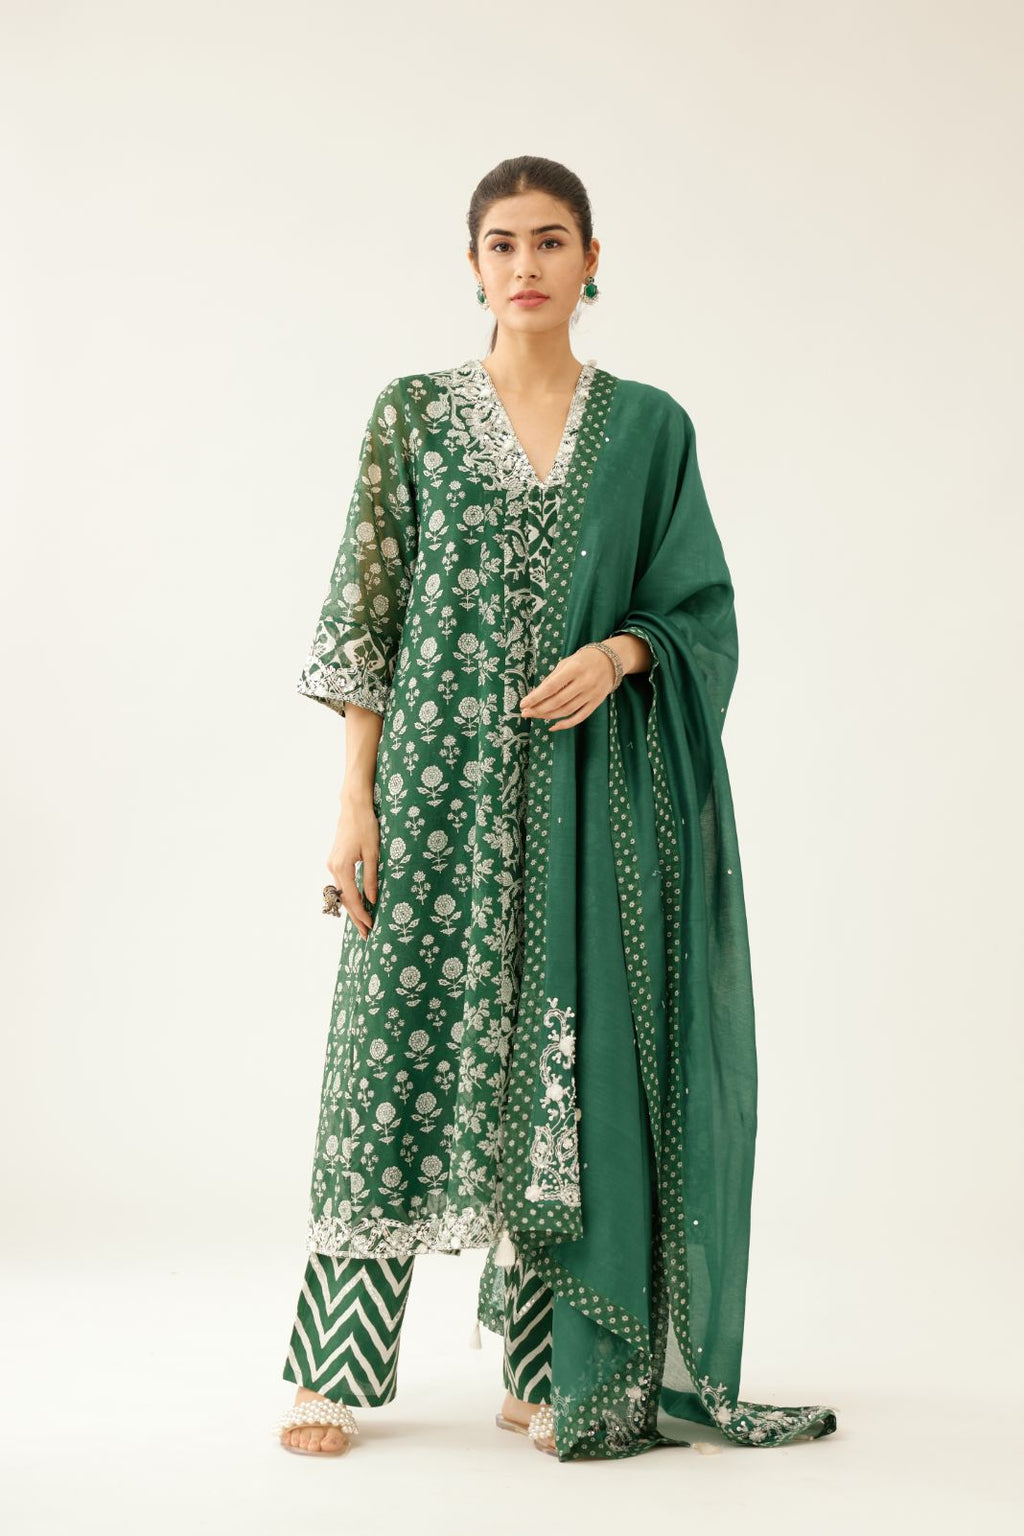 Green hand block printed kurta dress set with a V neck, detailed with sequin, tassels and bead work.